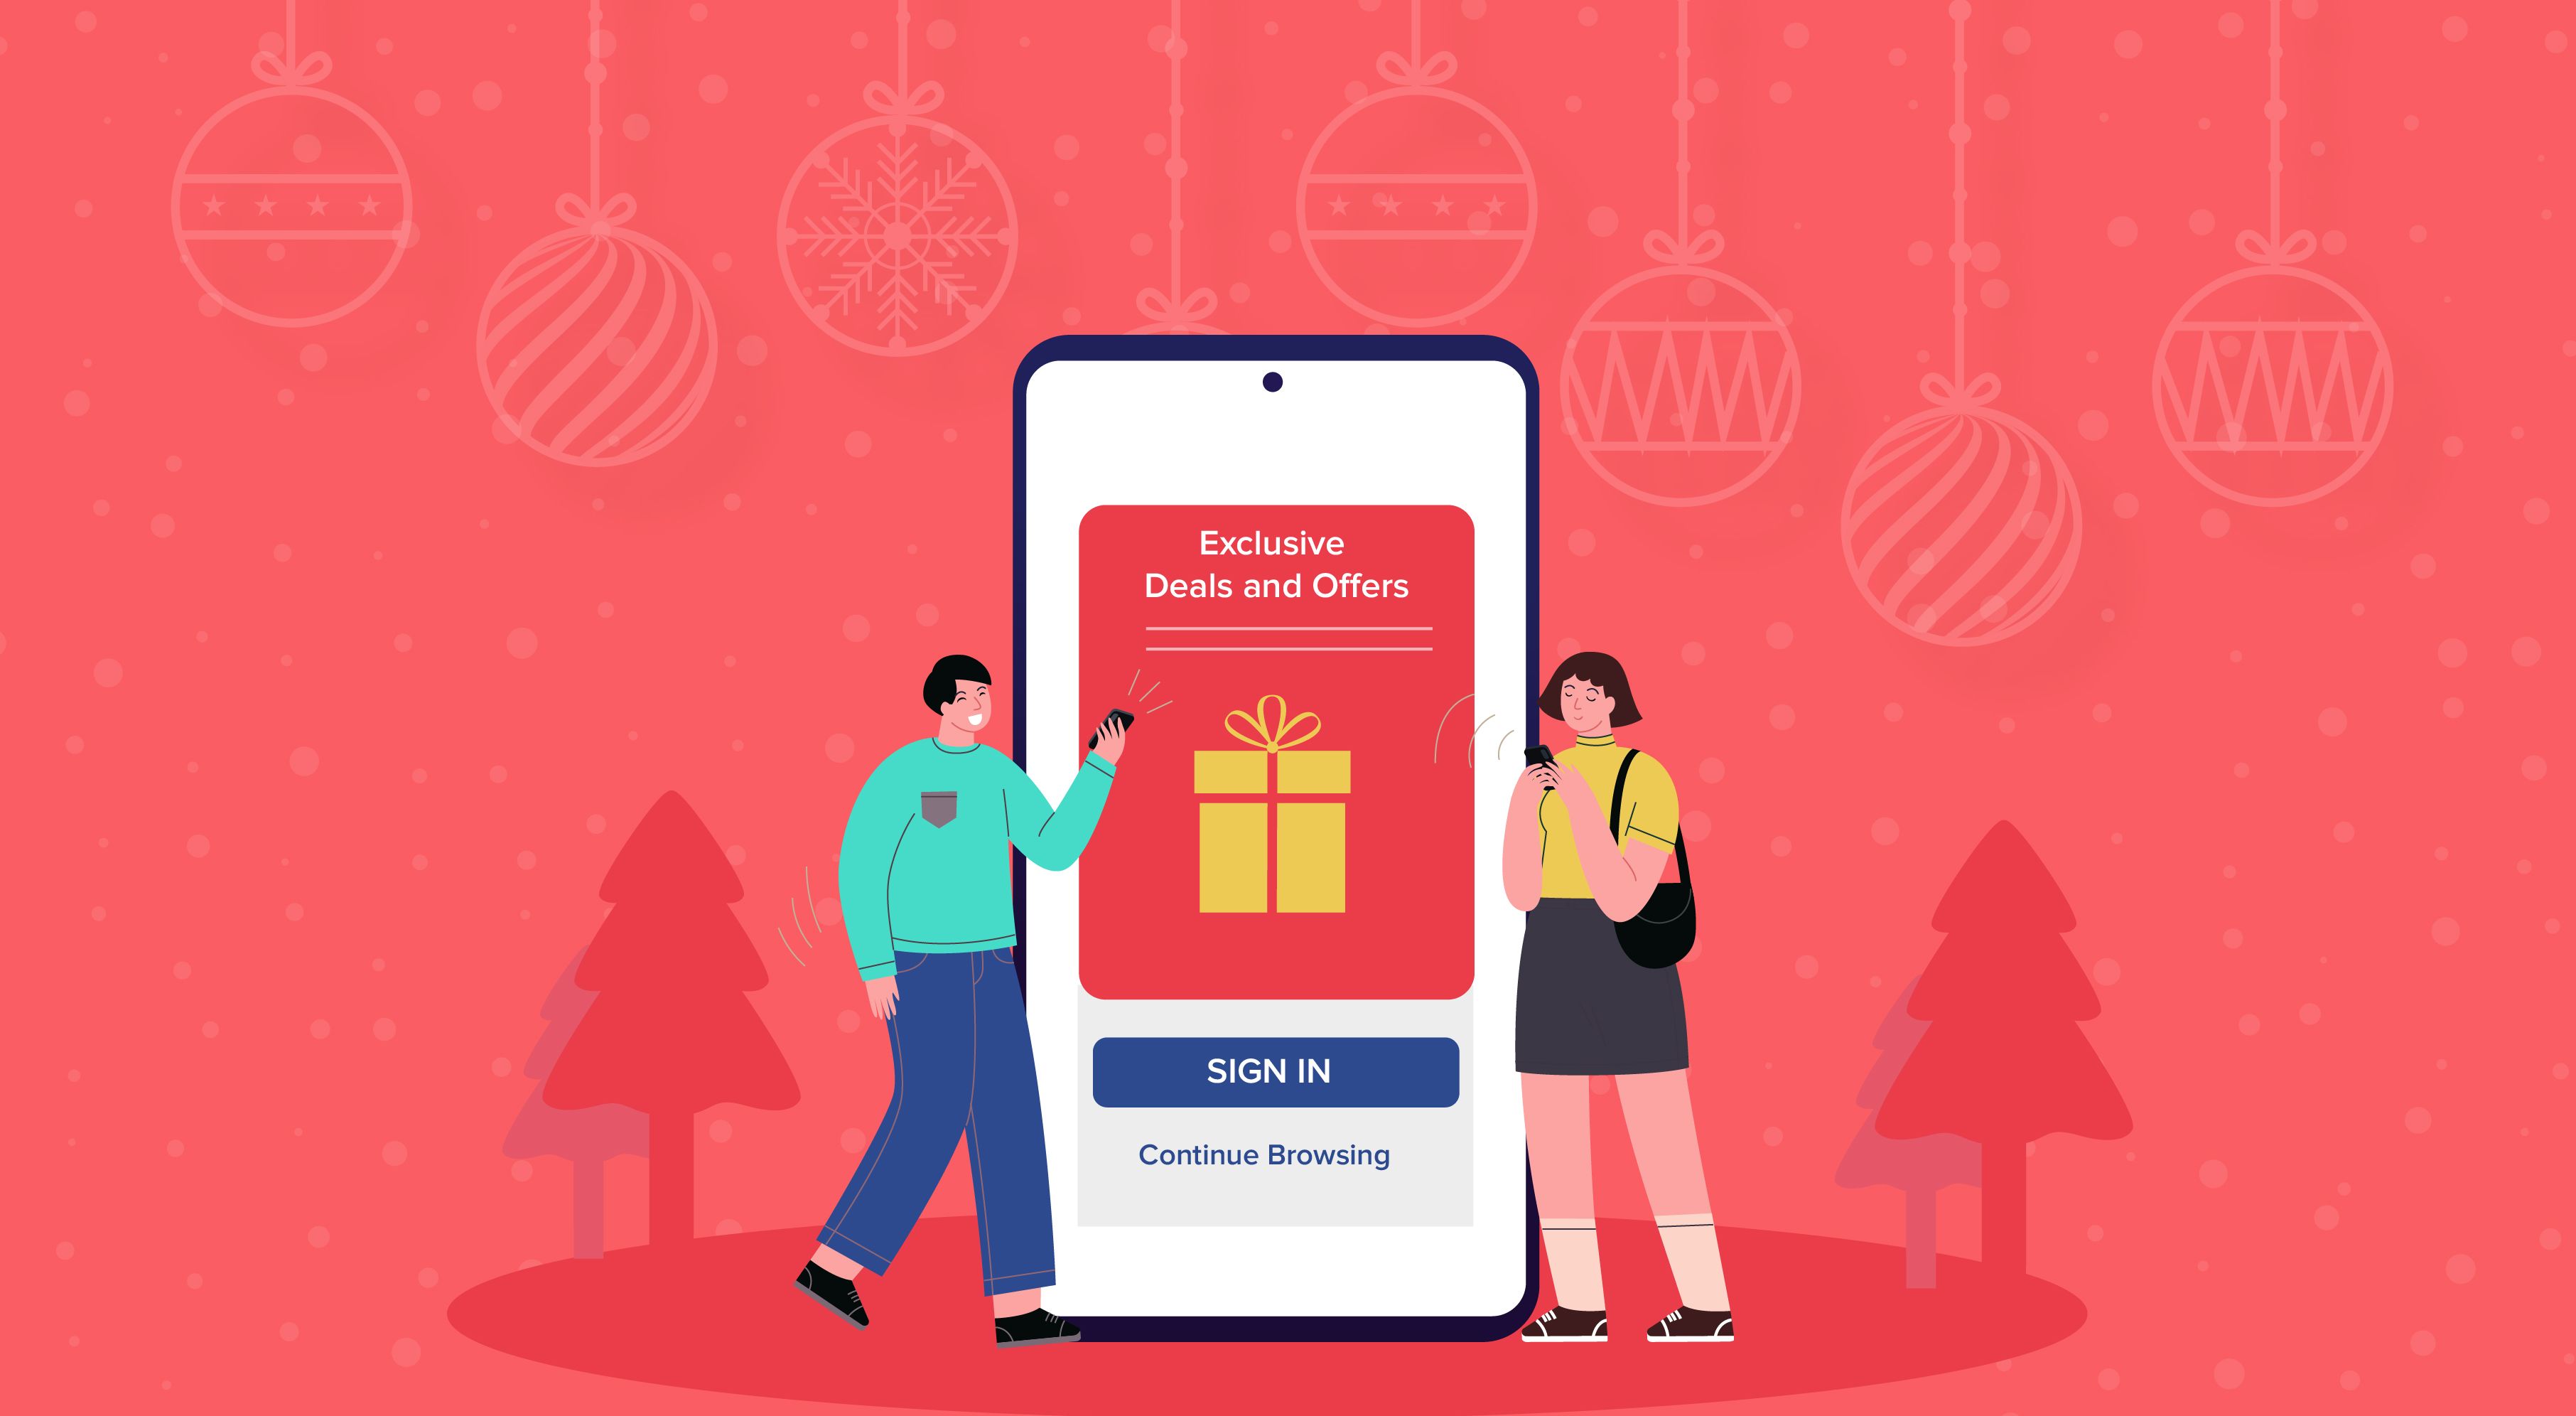 15 Best Christmas Apps For iOS & Android To Make Your Holidays Merrier [2021]